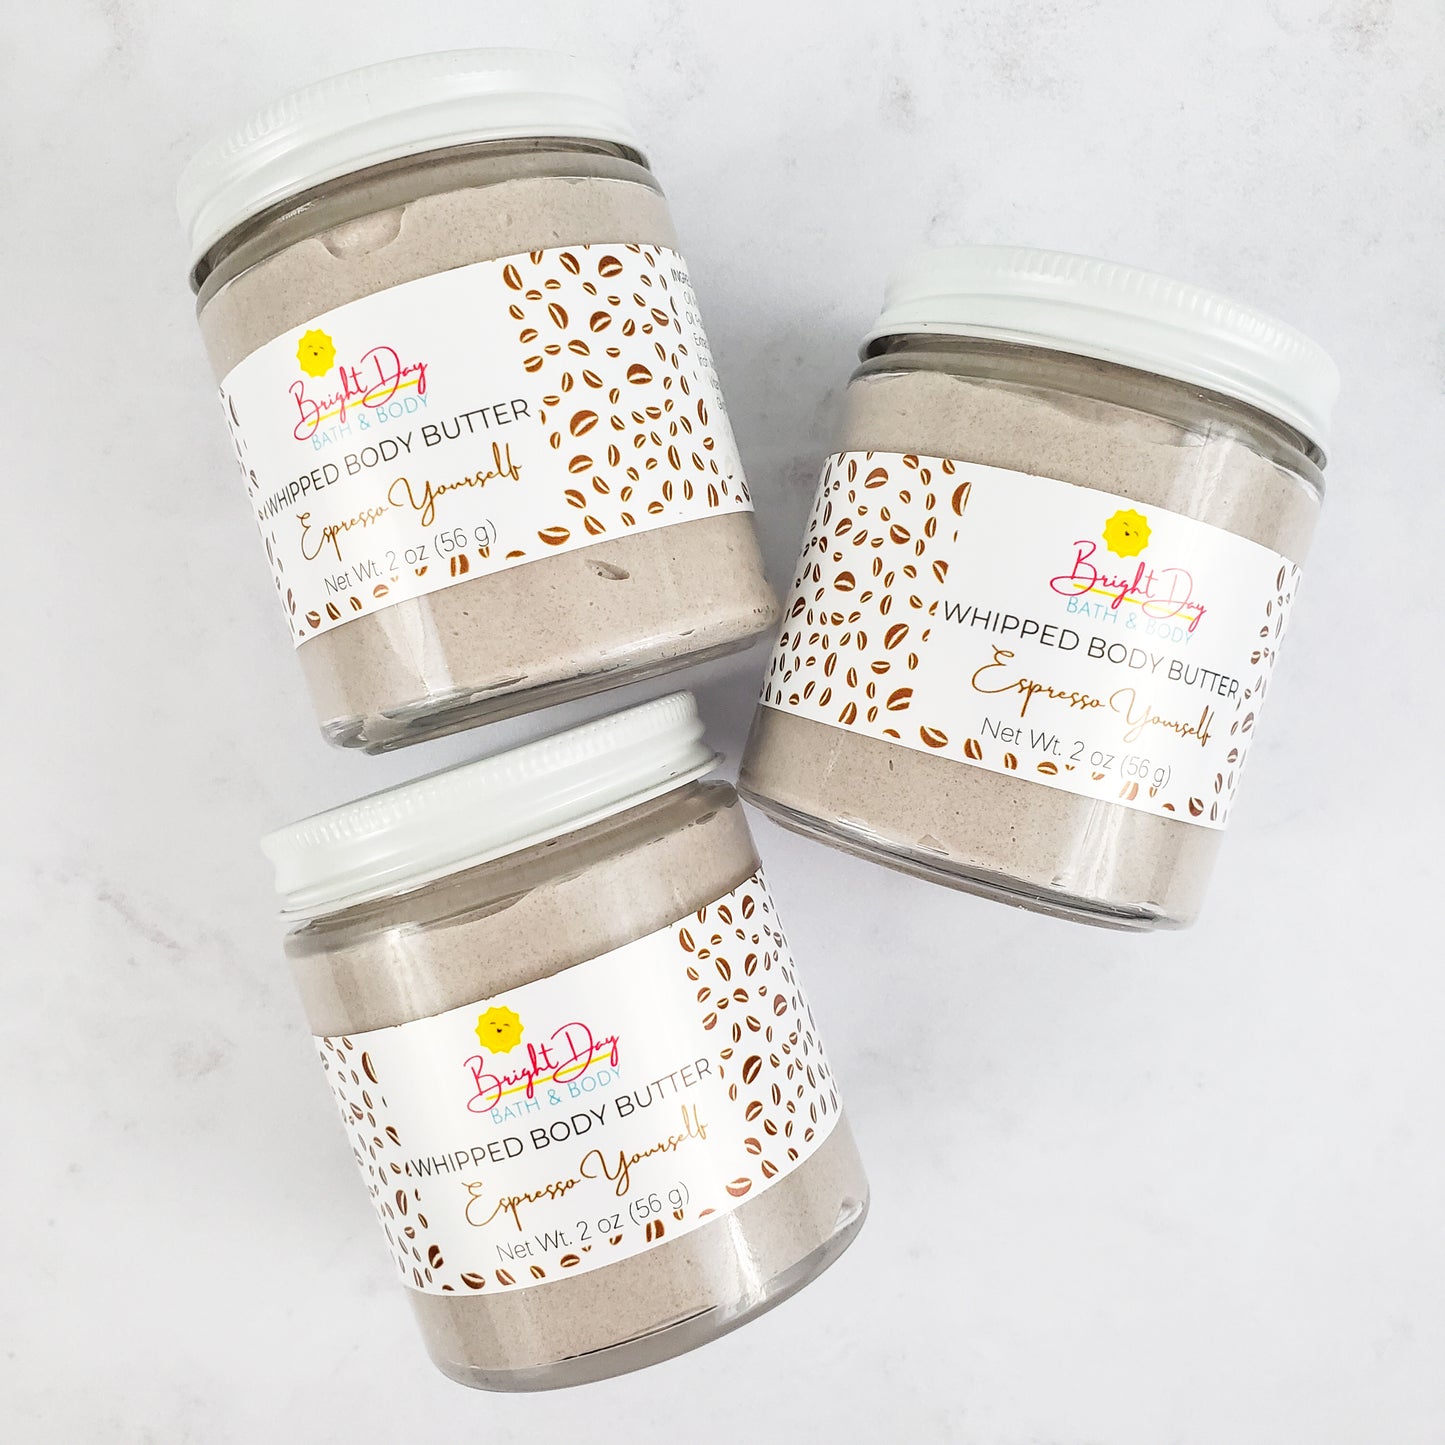 Three Espresso Yourself Body Butter Jars on a tile background